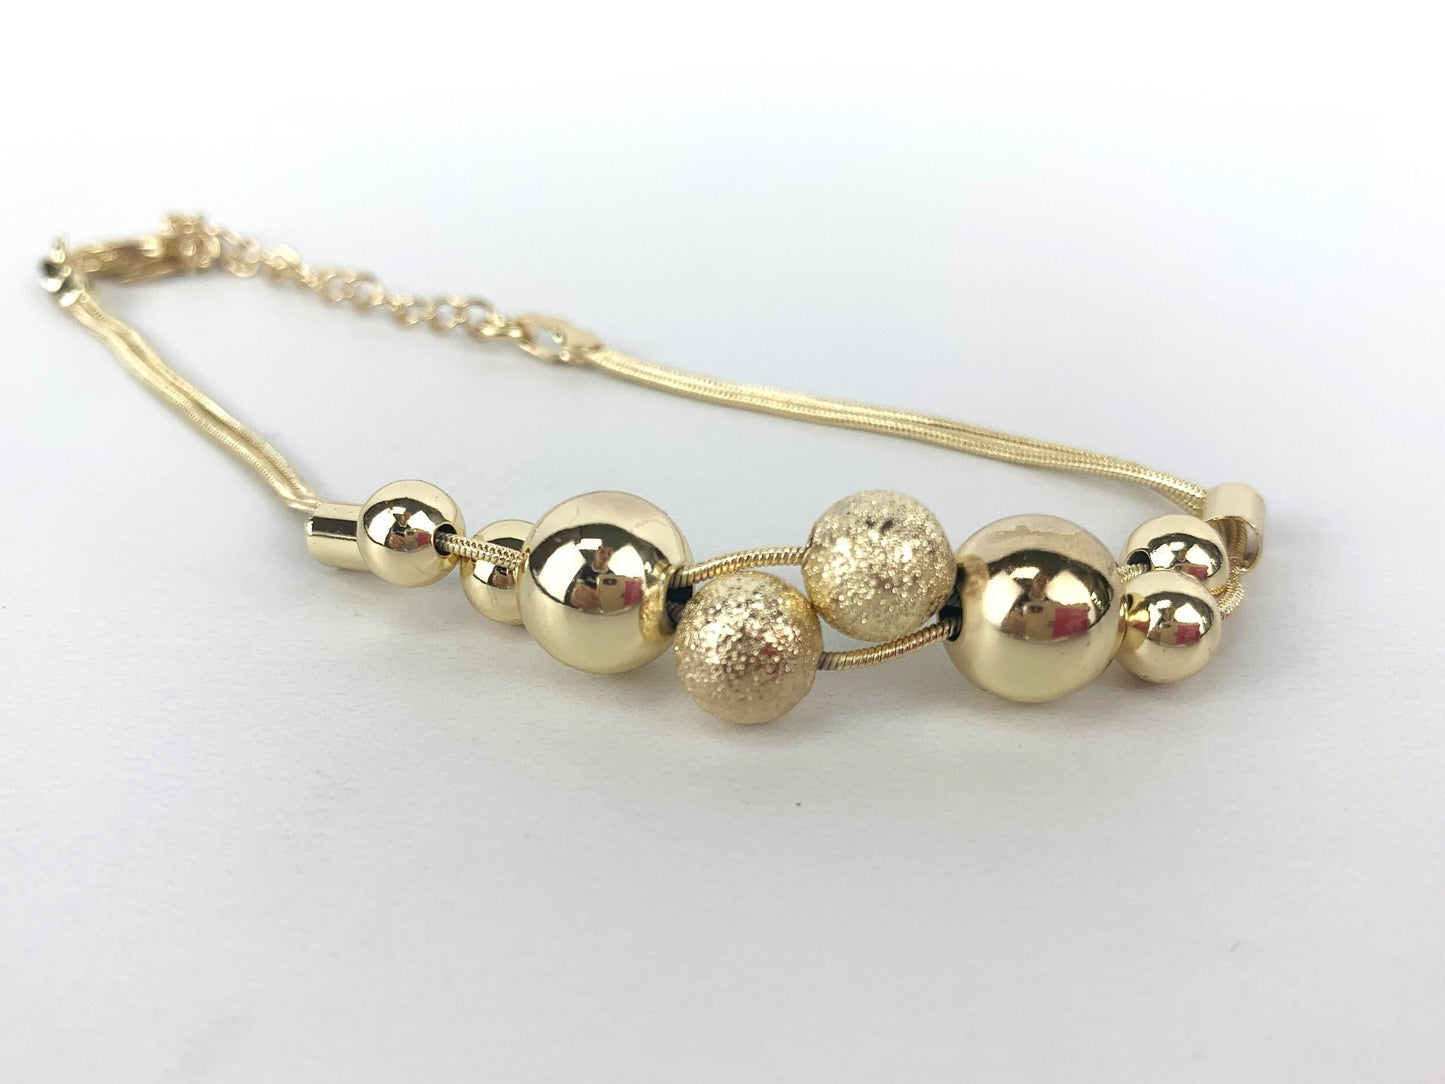 18k Gold Filled 8 Balls, and extender Bracelet Wholesale Jewelry Supplies